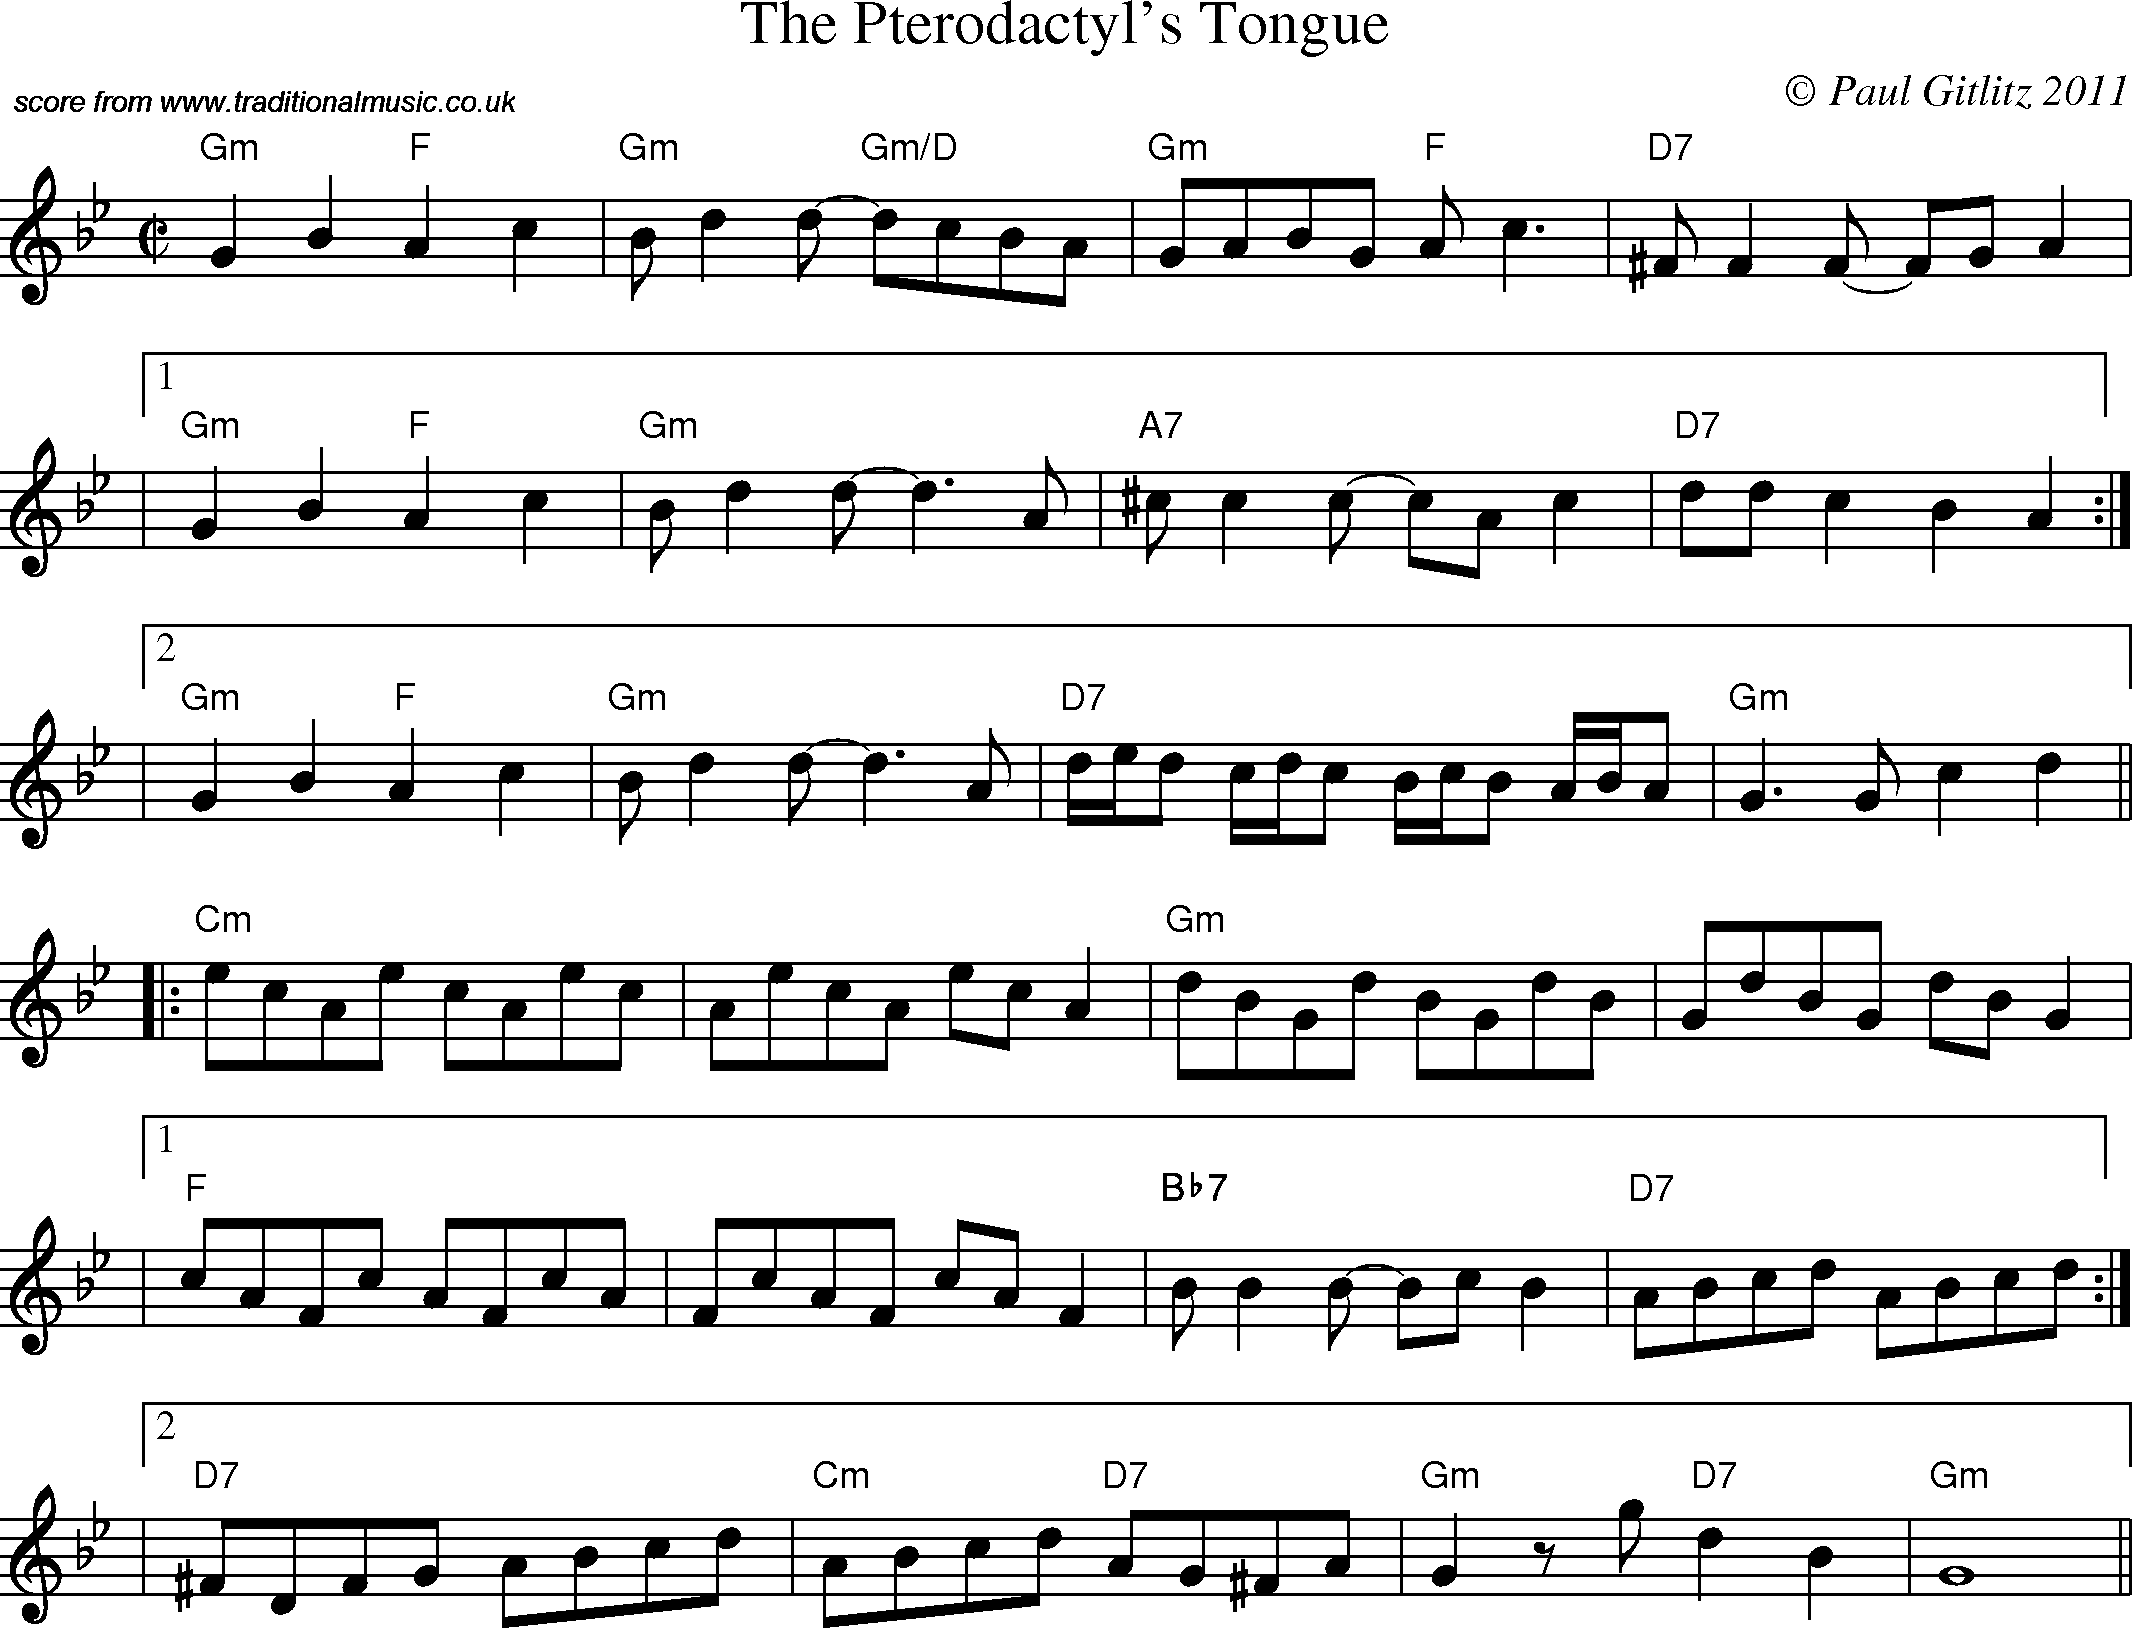 Sheet Music Score for Swing - Pterodactyl's Tongue, The